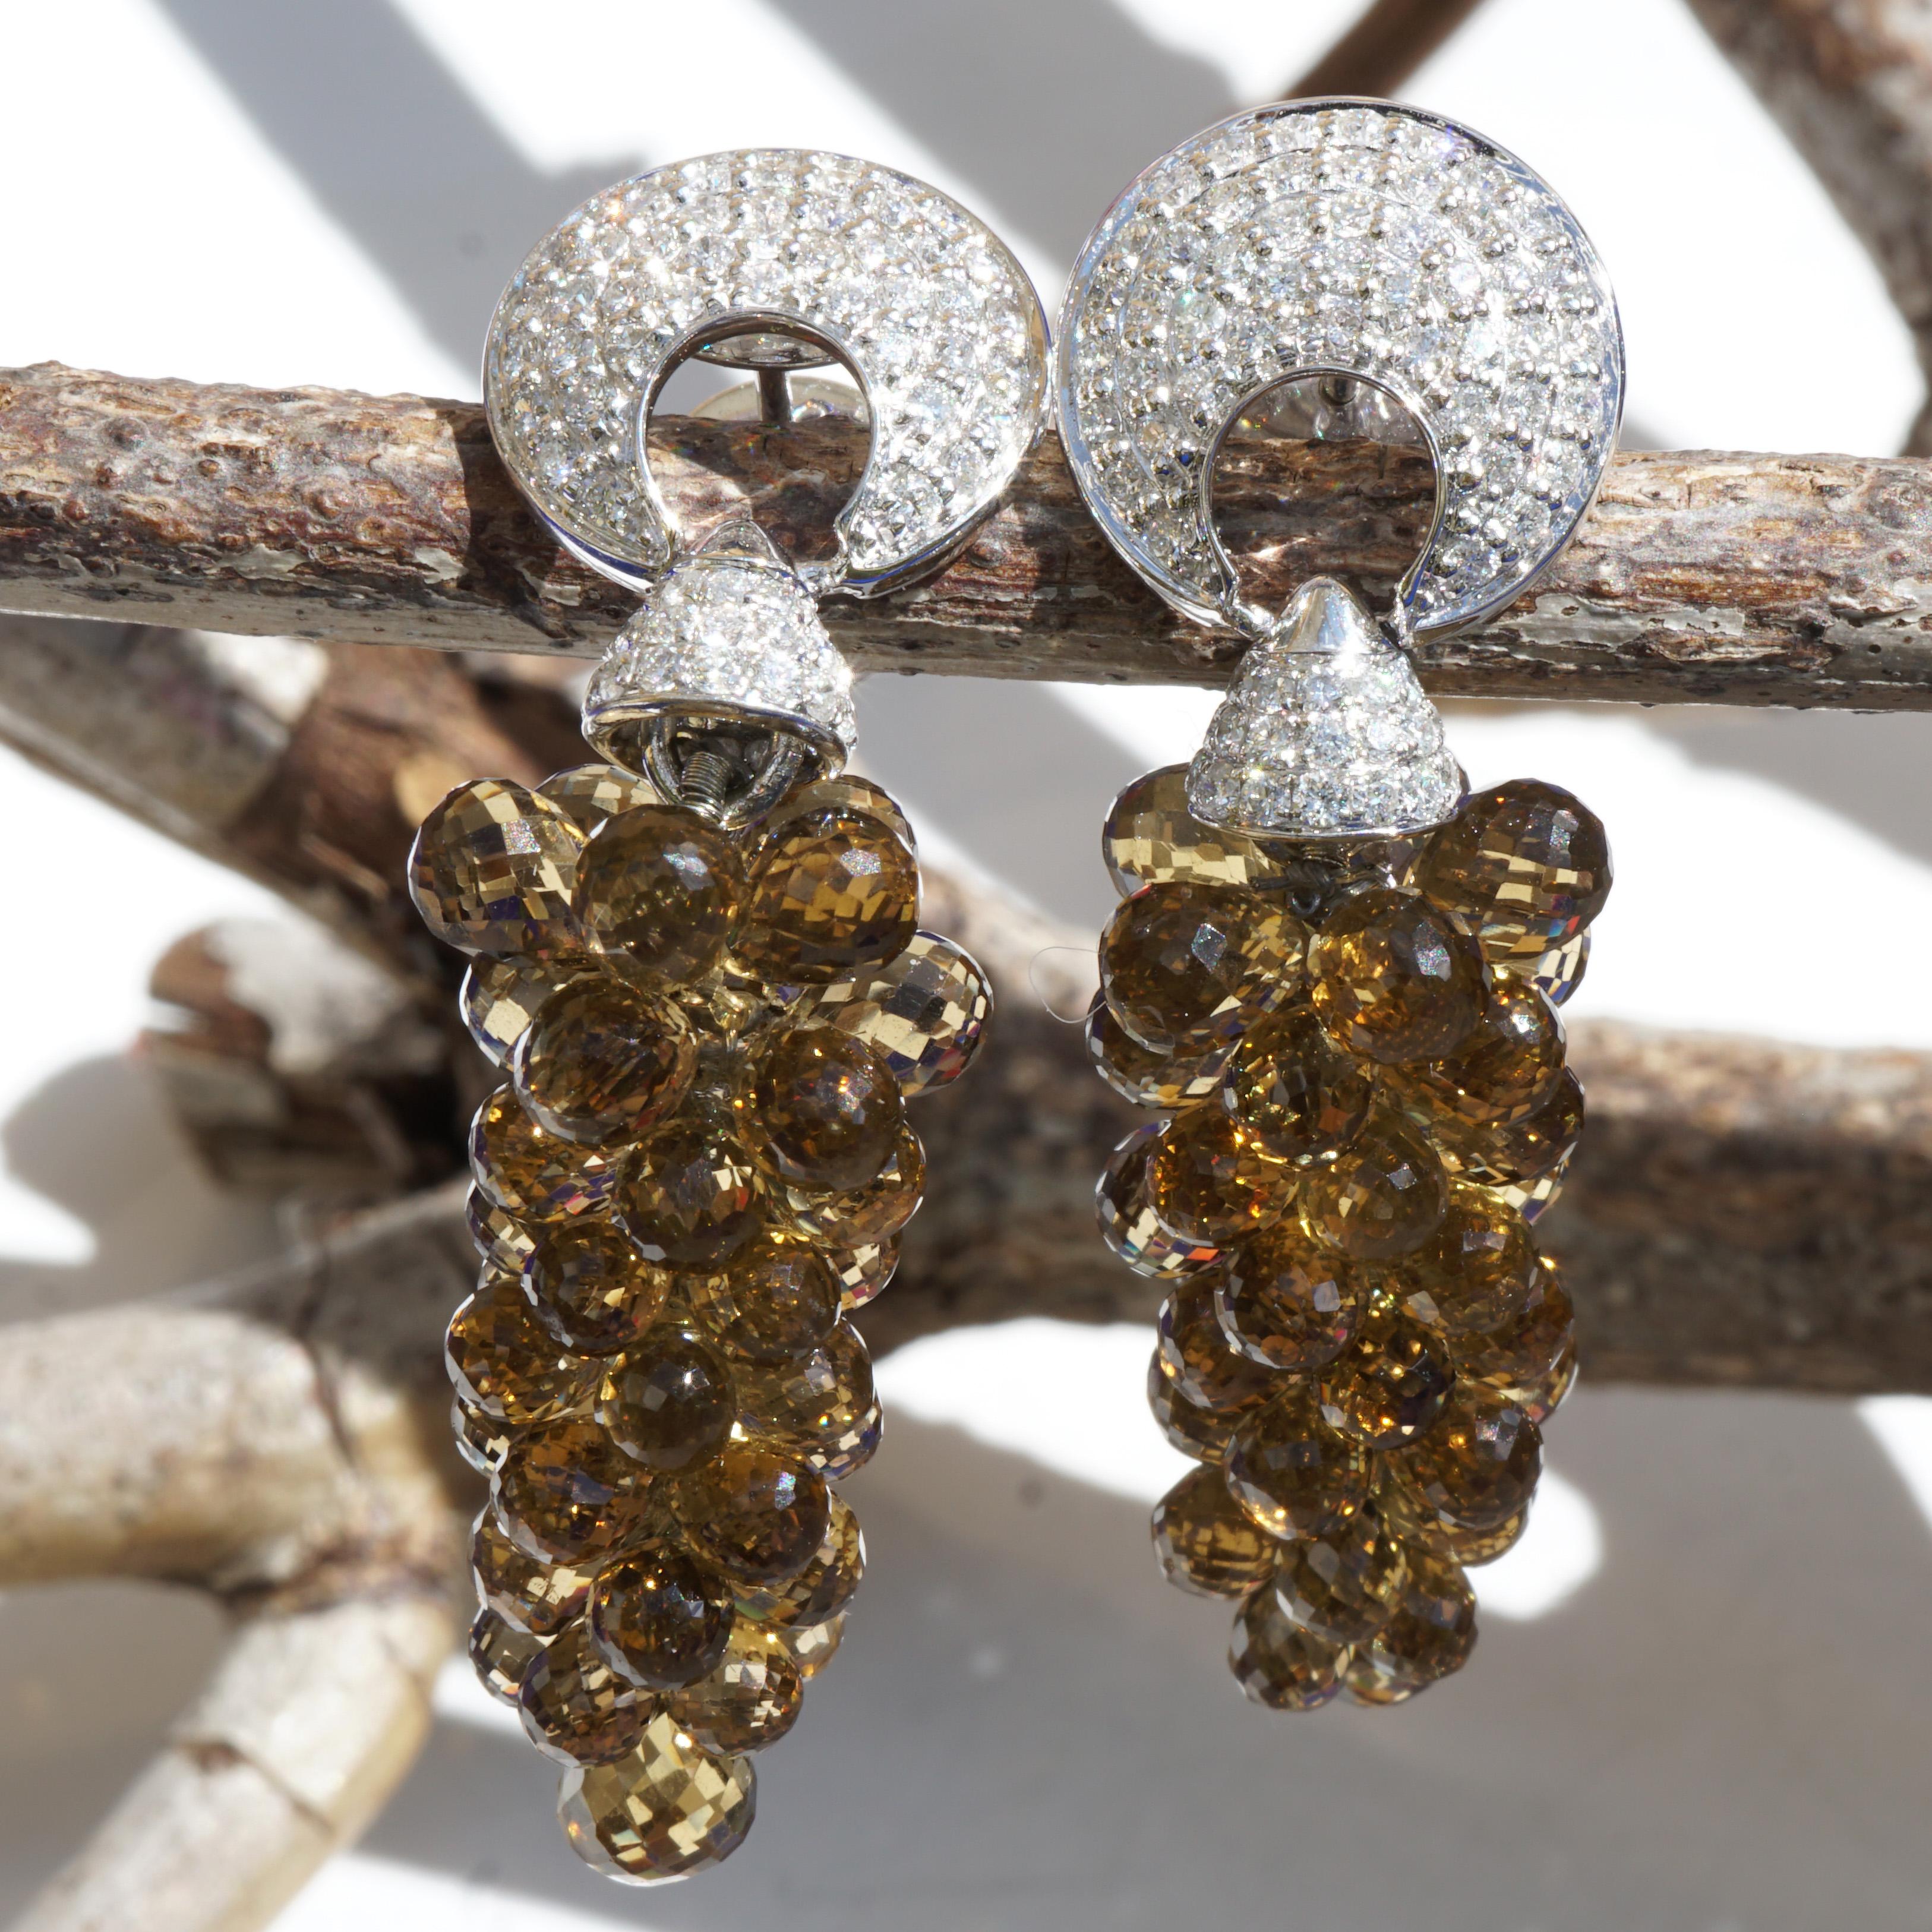 Brilliant 1.31 ct W/VS Smokey Quartz Earrings White Gold in the Shape of Grapes For Sale 3